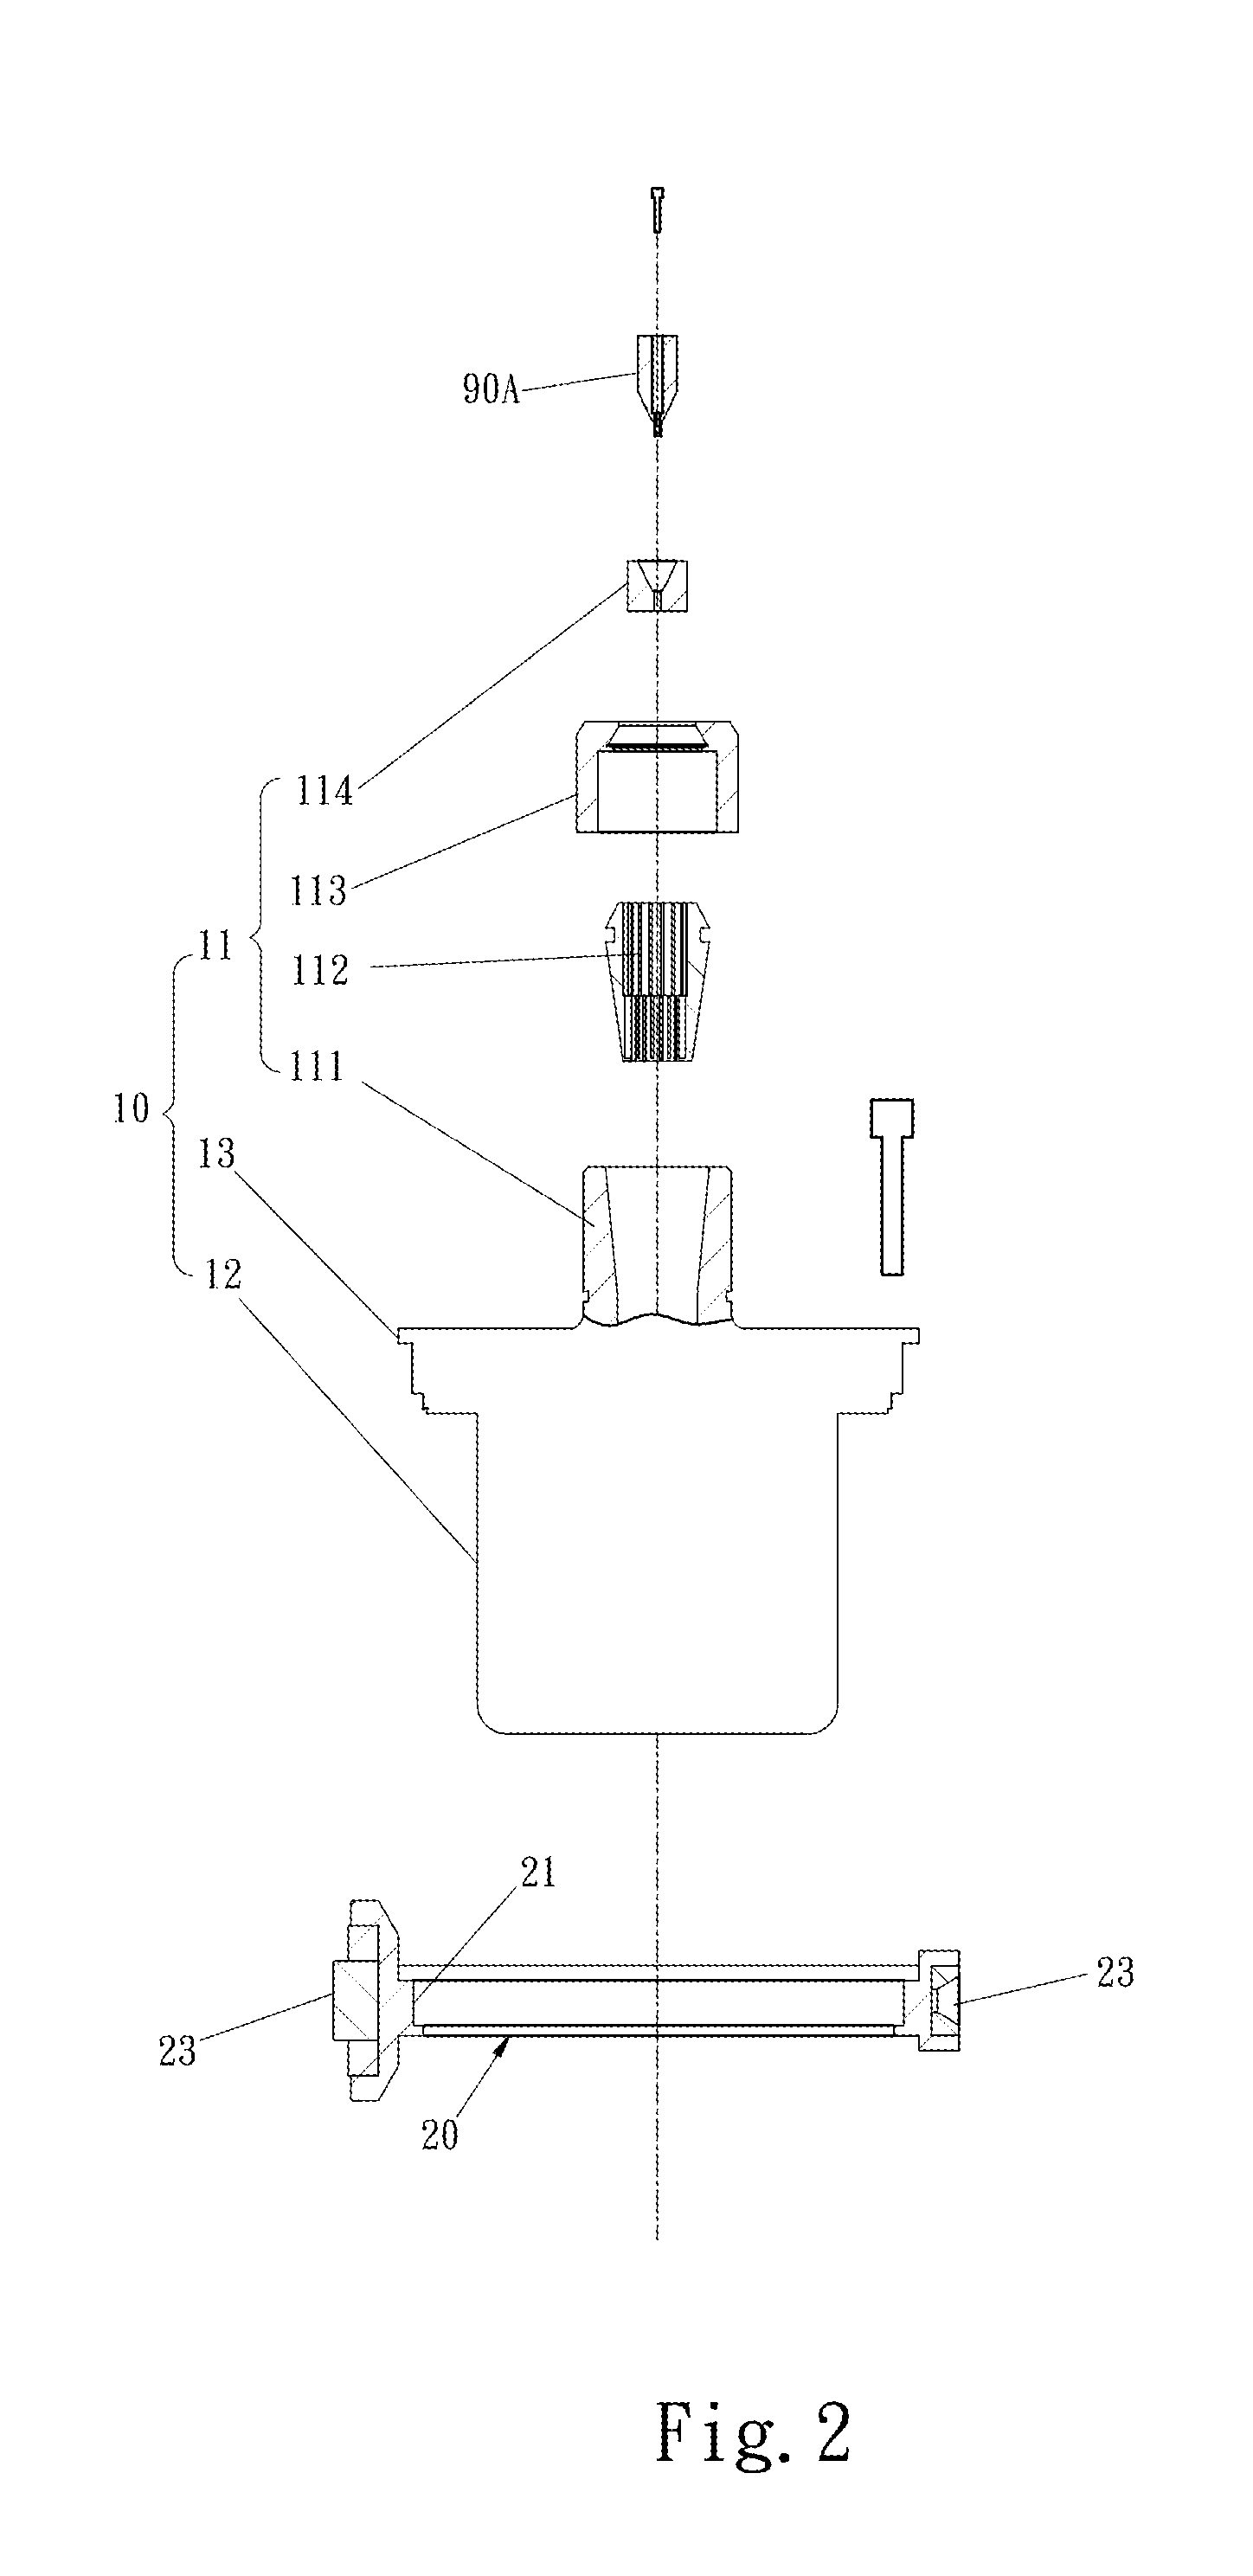 Ultrasonic positioning device for five-axis machine